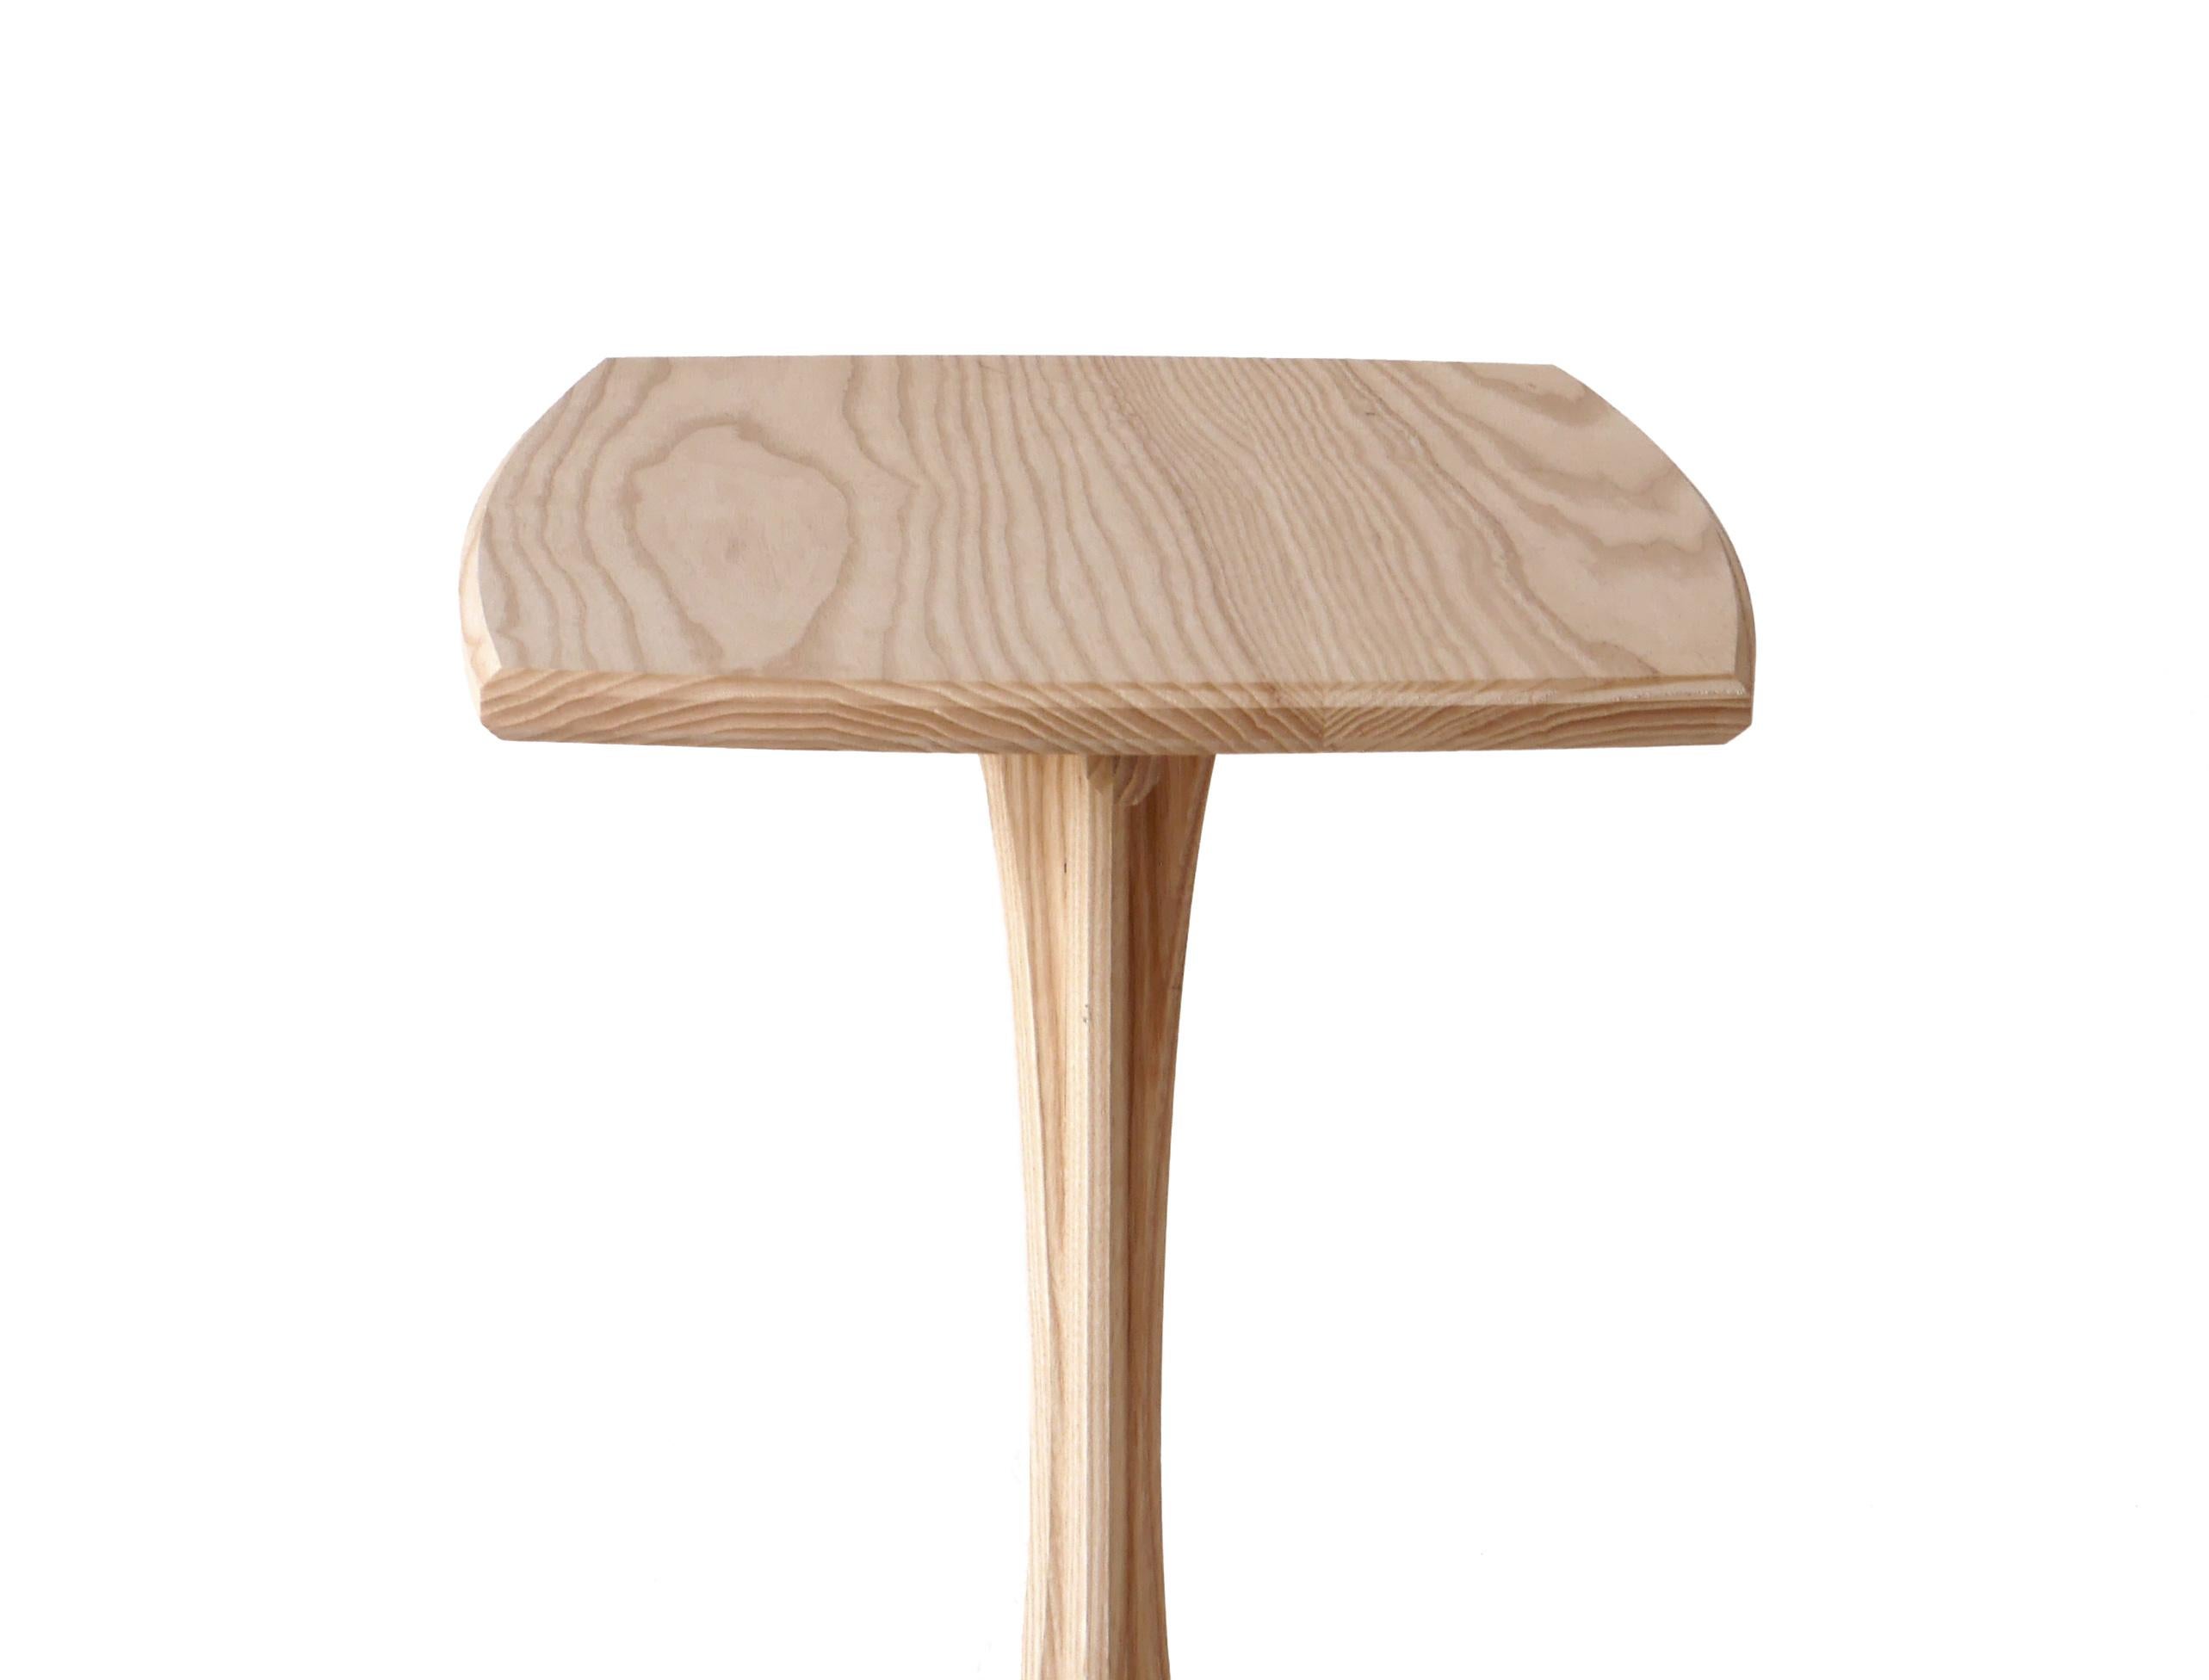 American Ash Plume Side Table, Contemporary Handmade Pedestal End Table by Arid For Sale